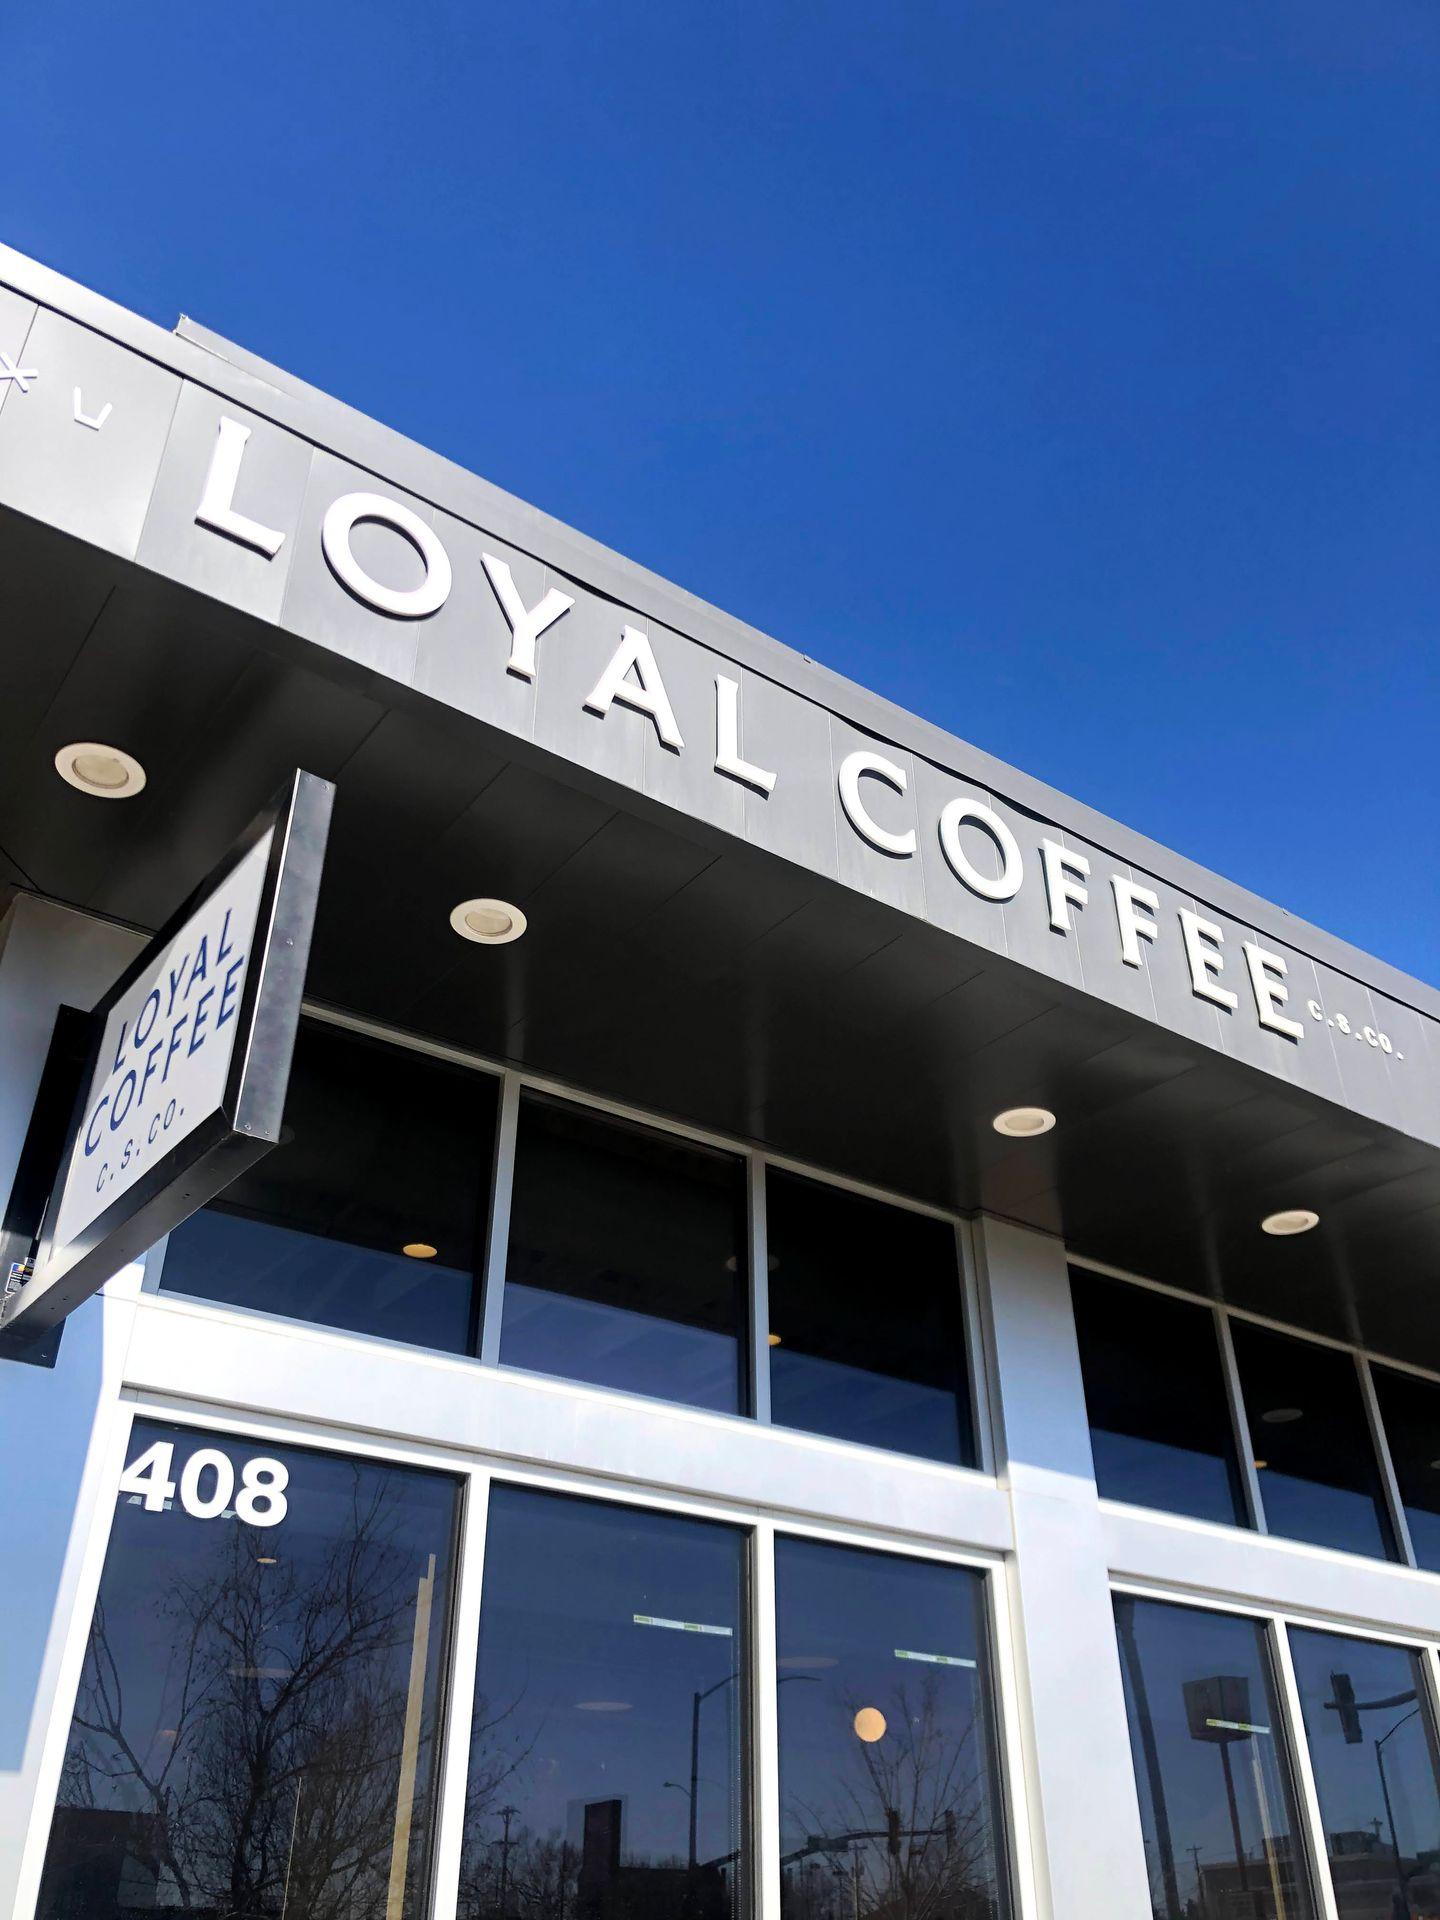 The exterior of Loyal Coffee. The building is gray with white letters.